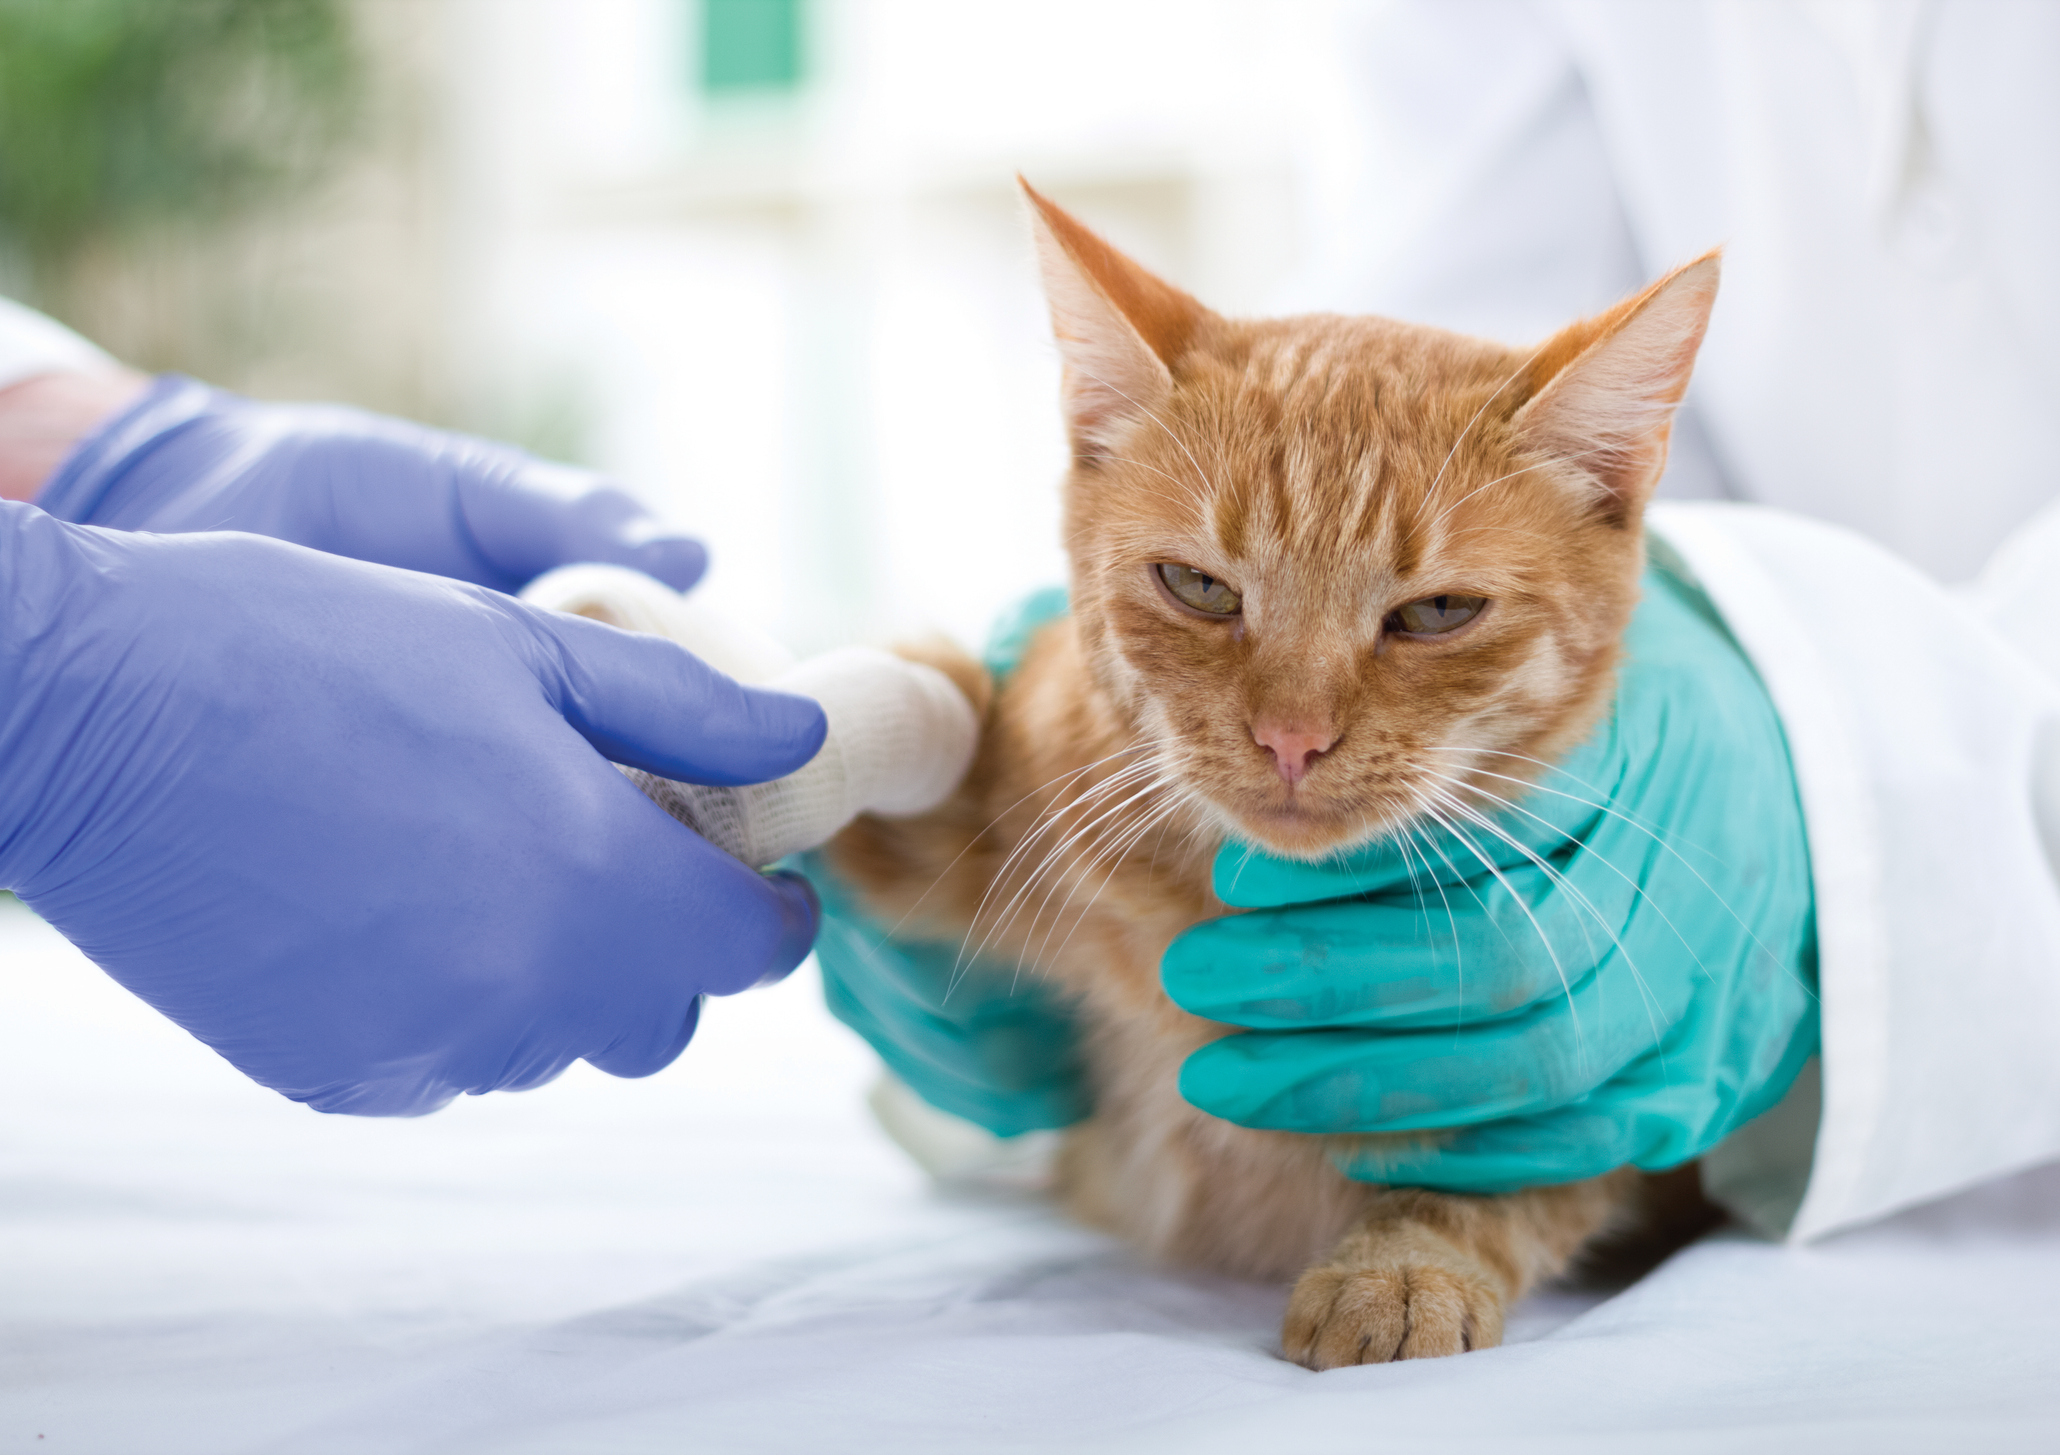 An orange cat gets his paw bandaged by the veterinarian